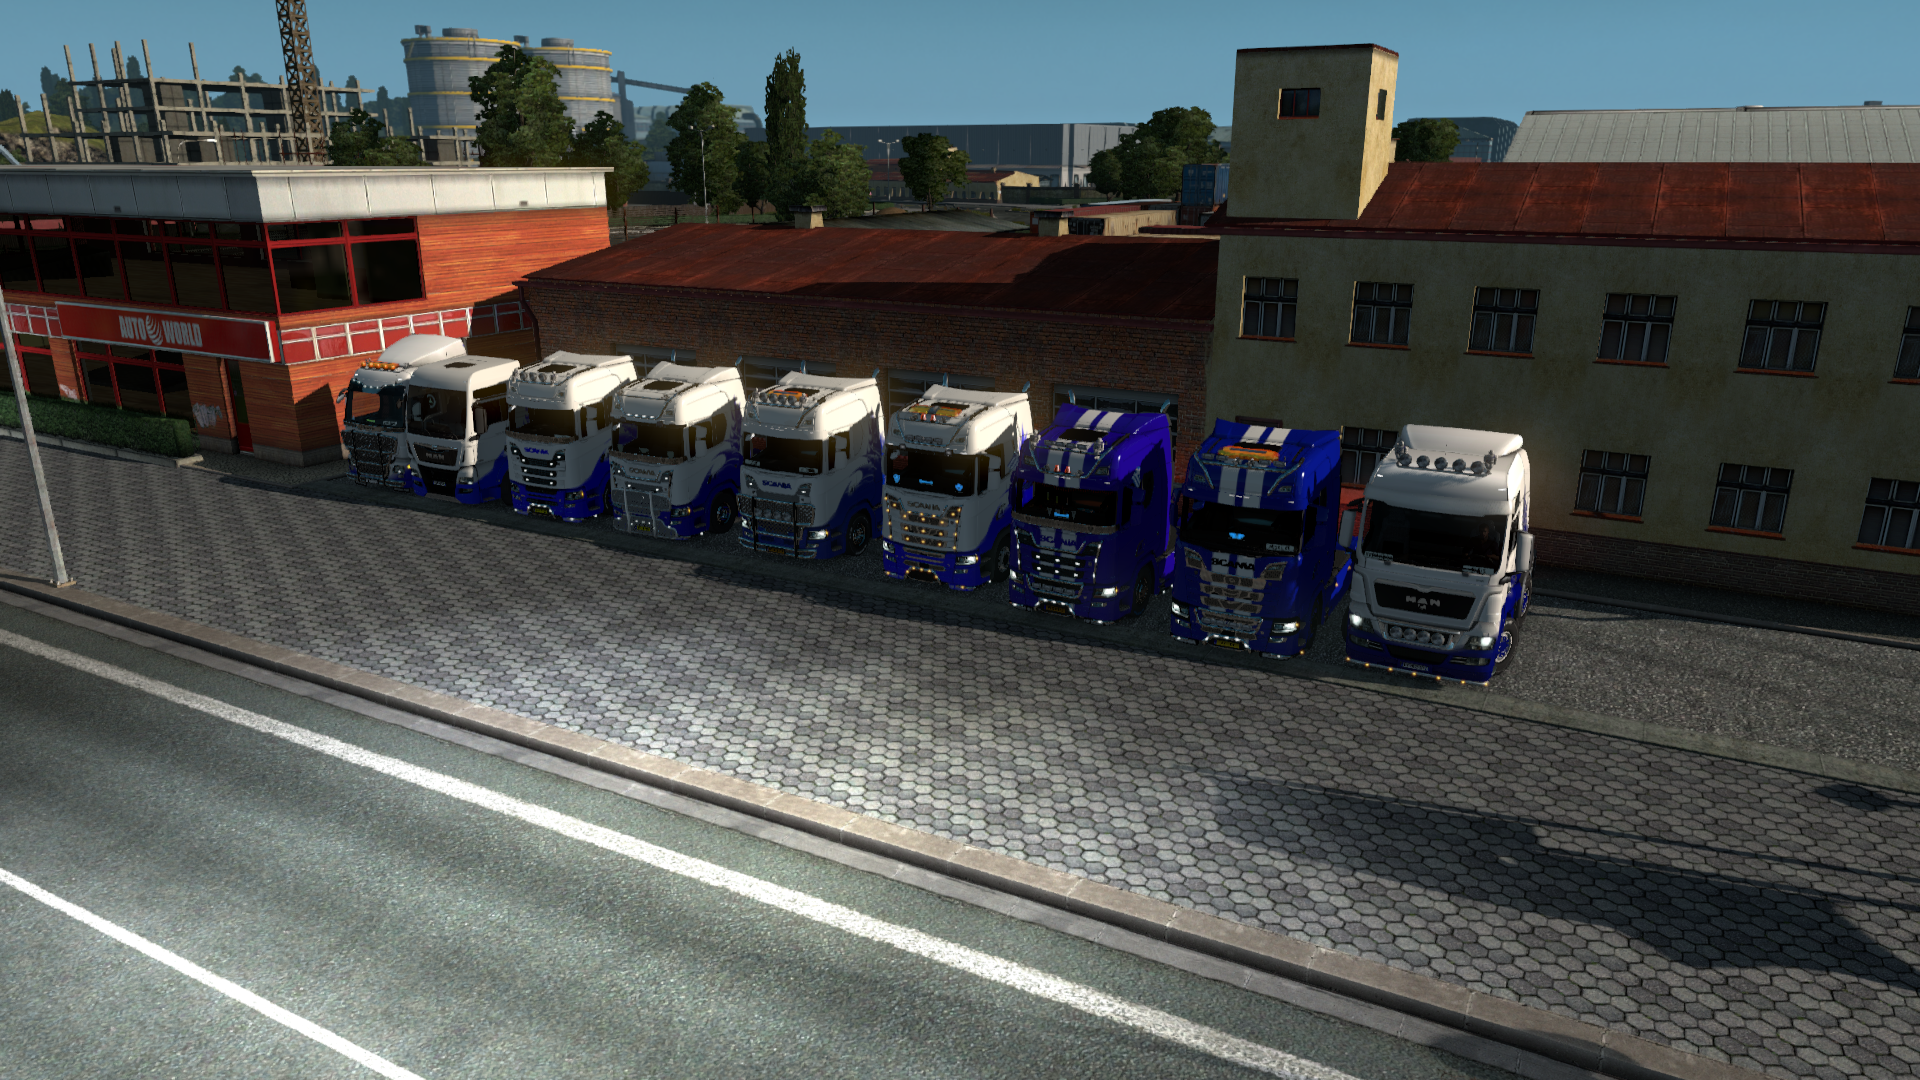 ets2_20191011_234520_00.png